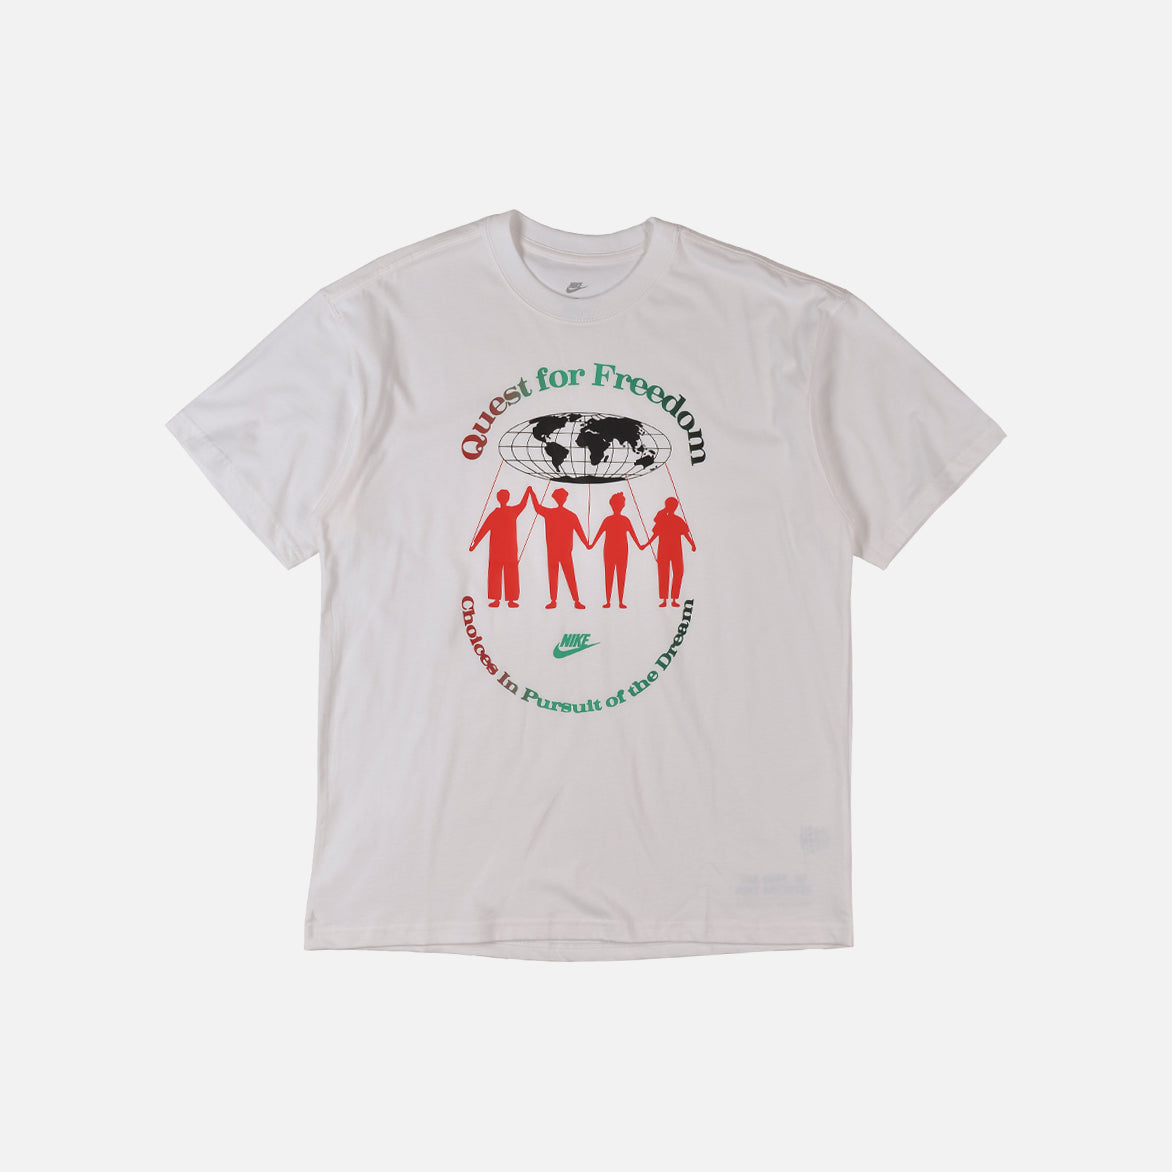 NSW QUEST FOR FREEDOM TEE - WHITE